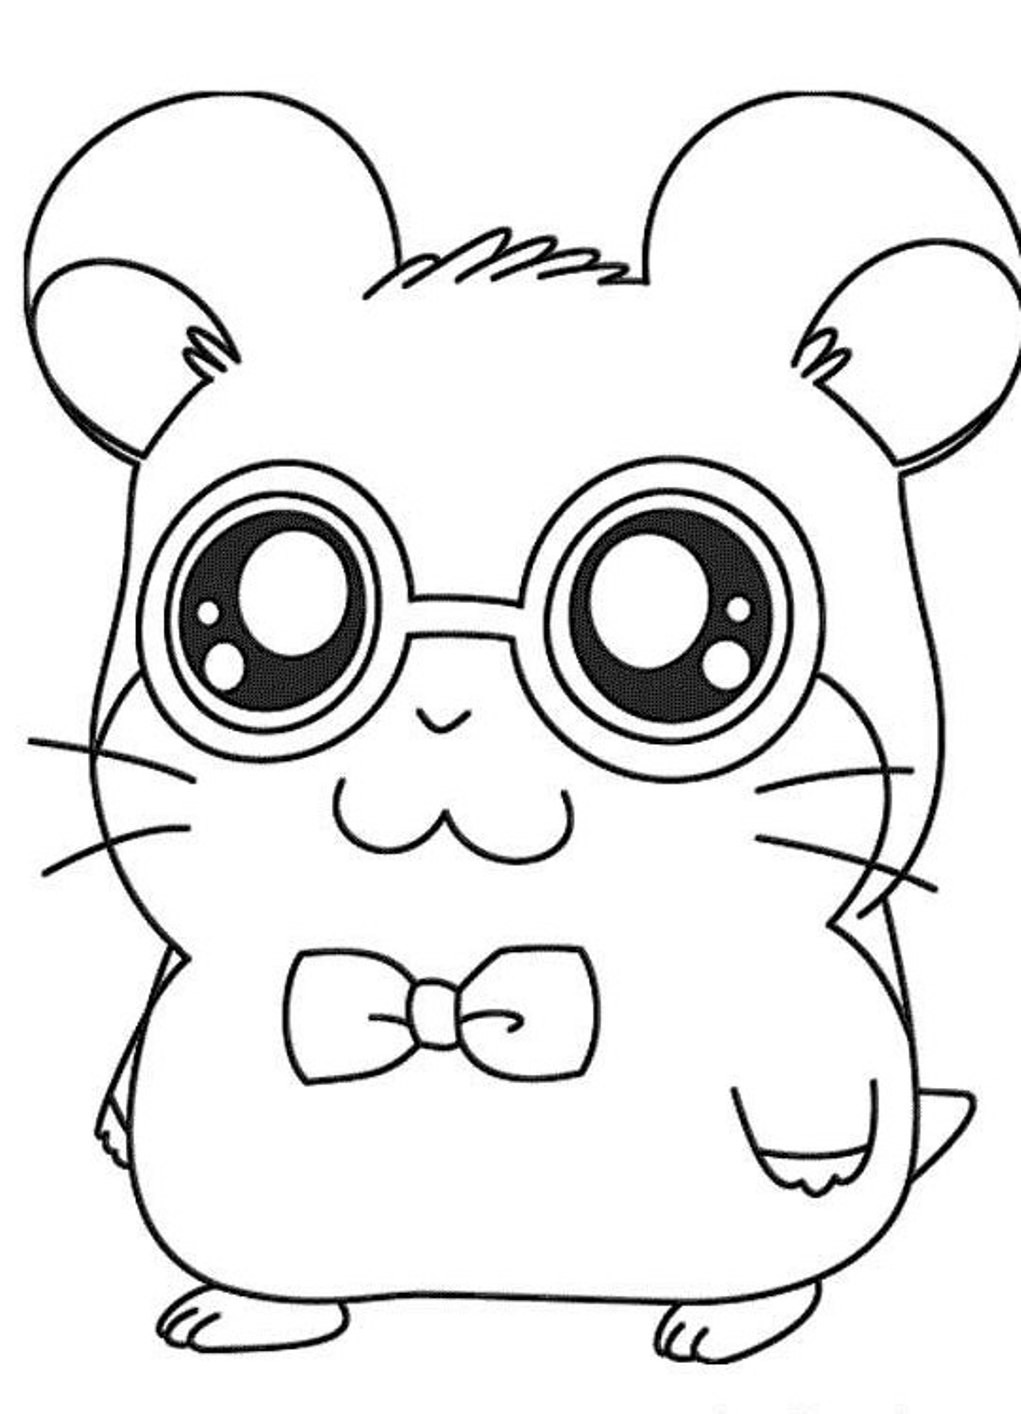 Cute Easy Coloring Pages at GetColorings.com | Free ...